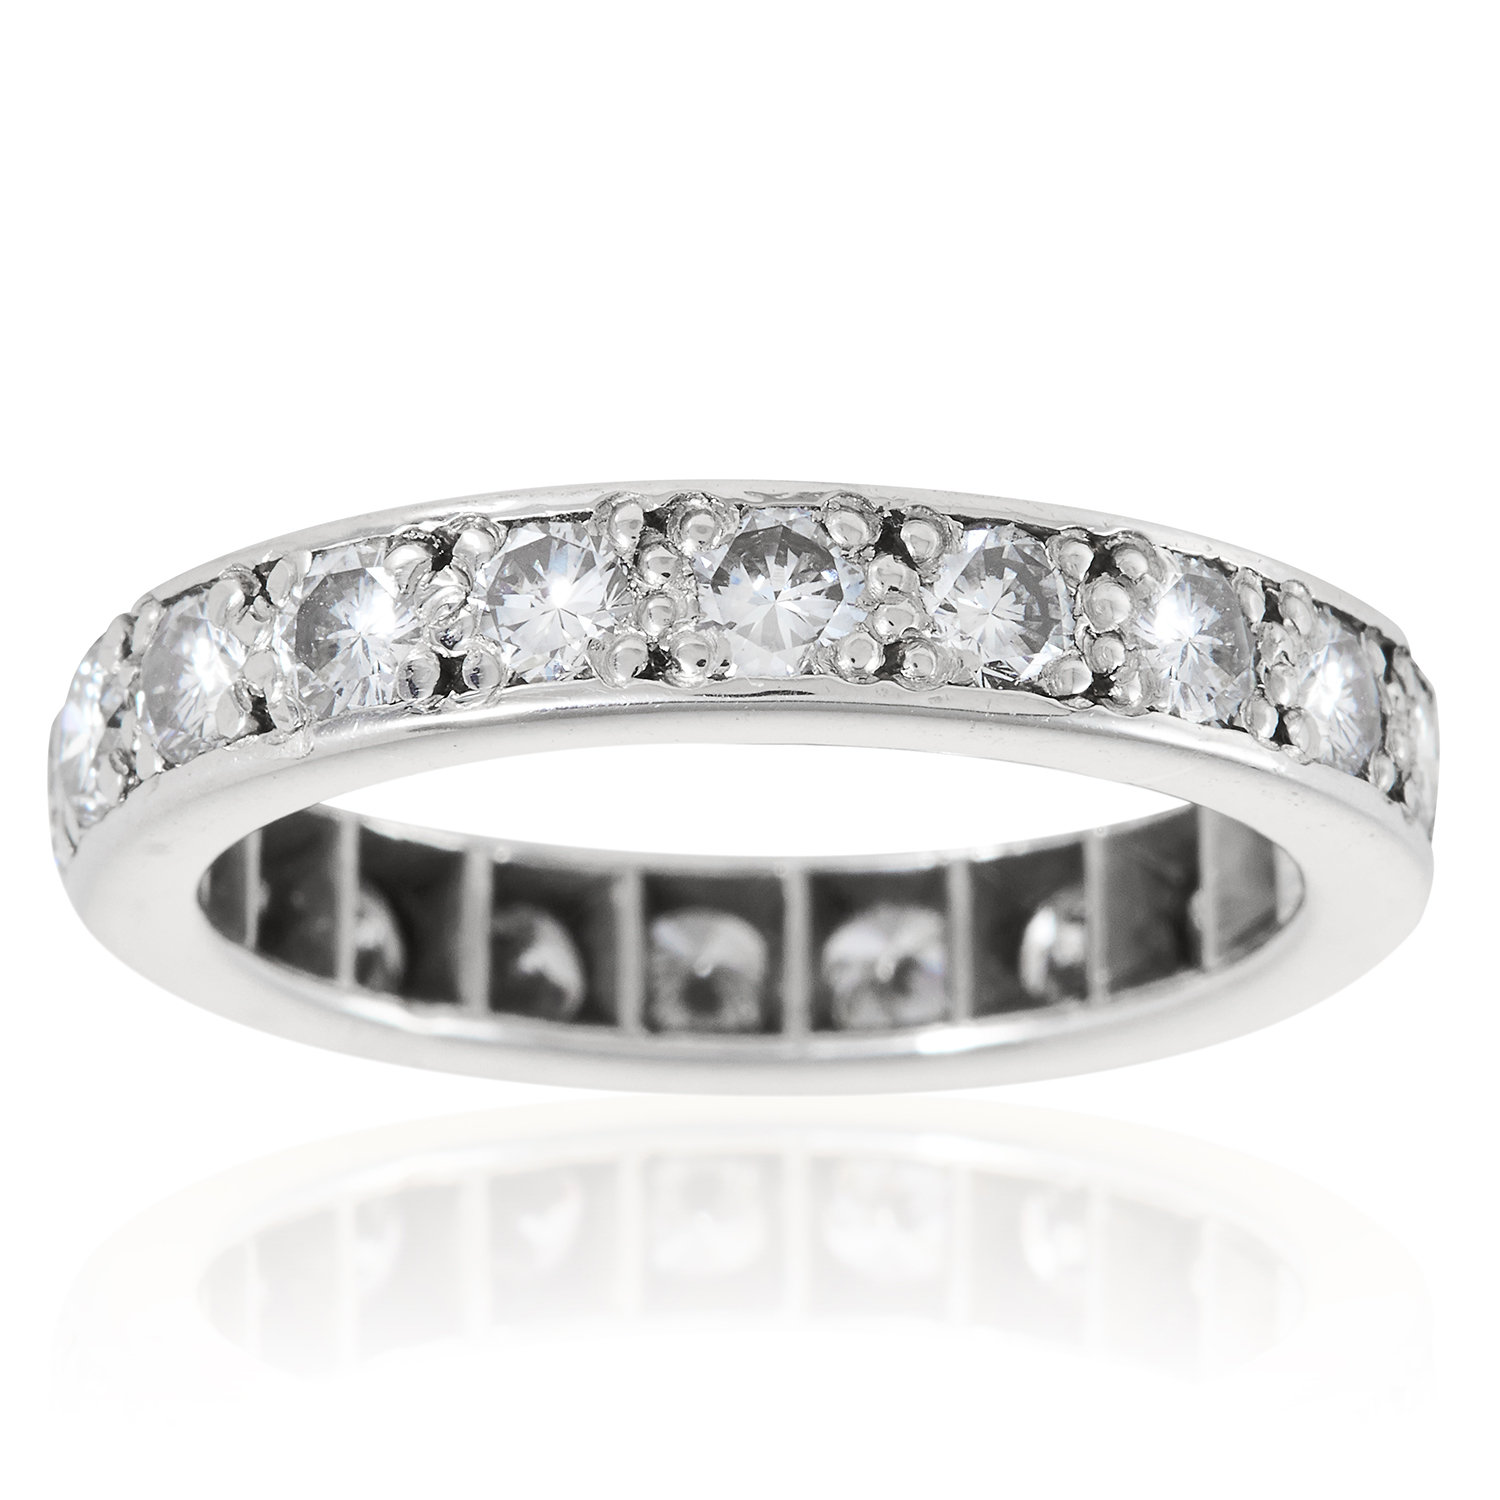 A 2.00 CARAT DIAMOND ETERNITY RING in white gold or platinum, set with round cut diamonds